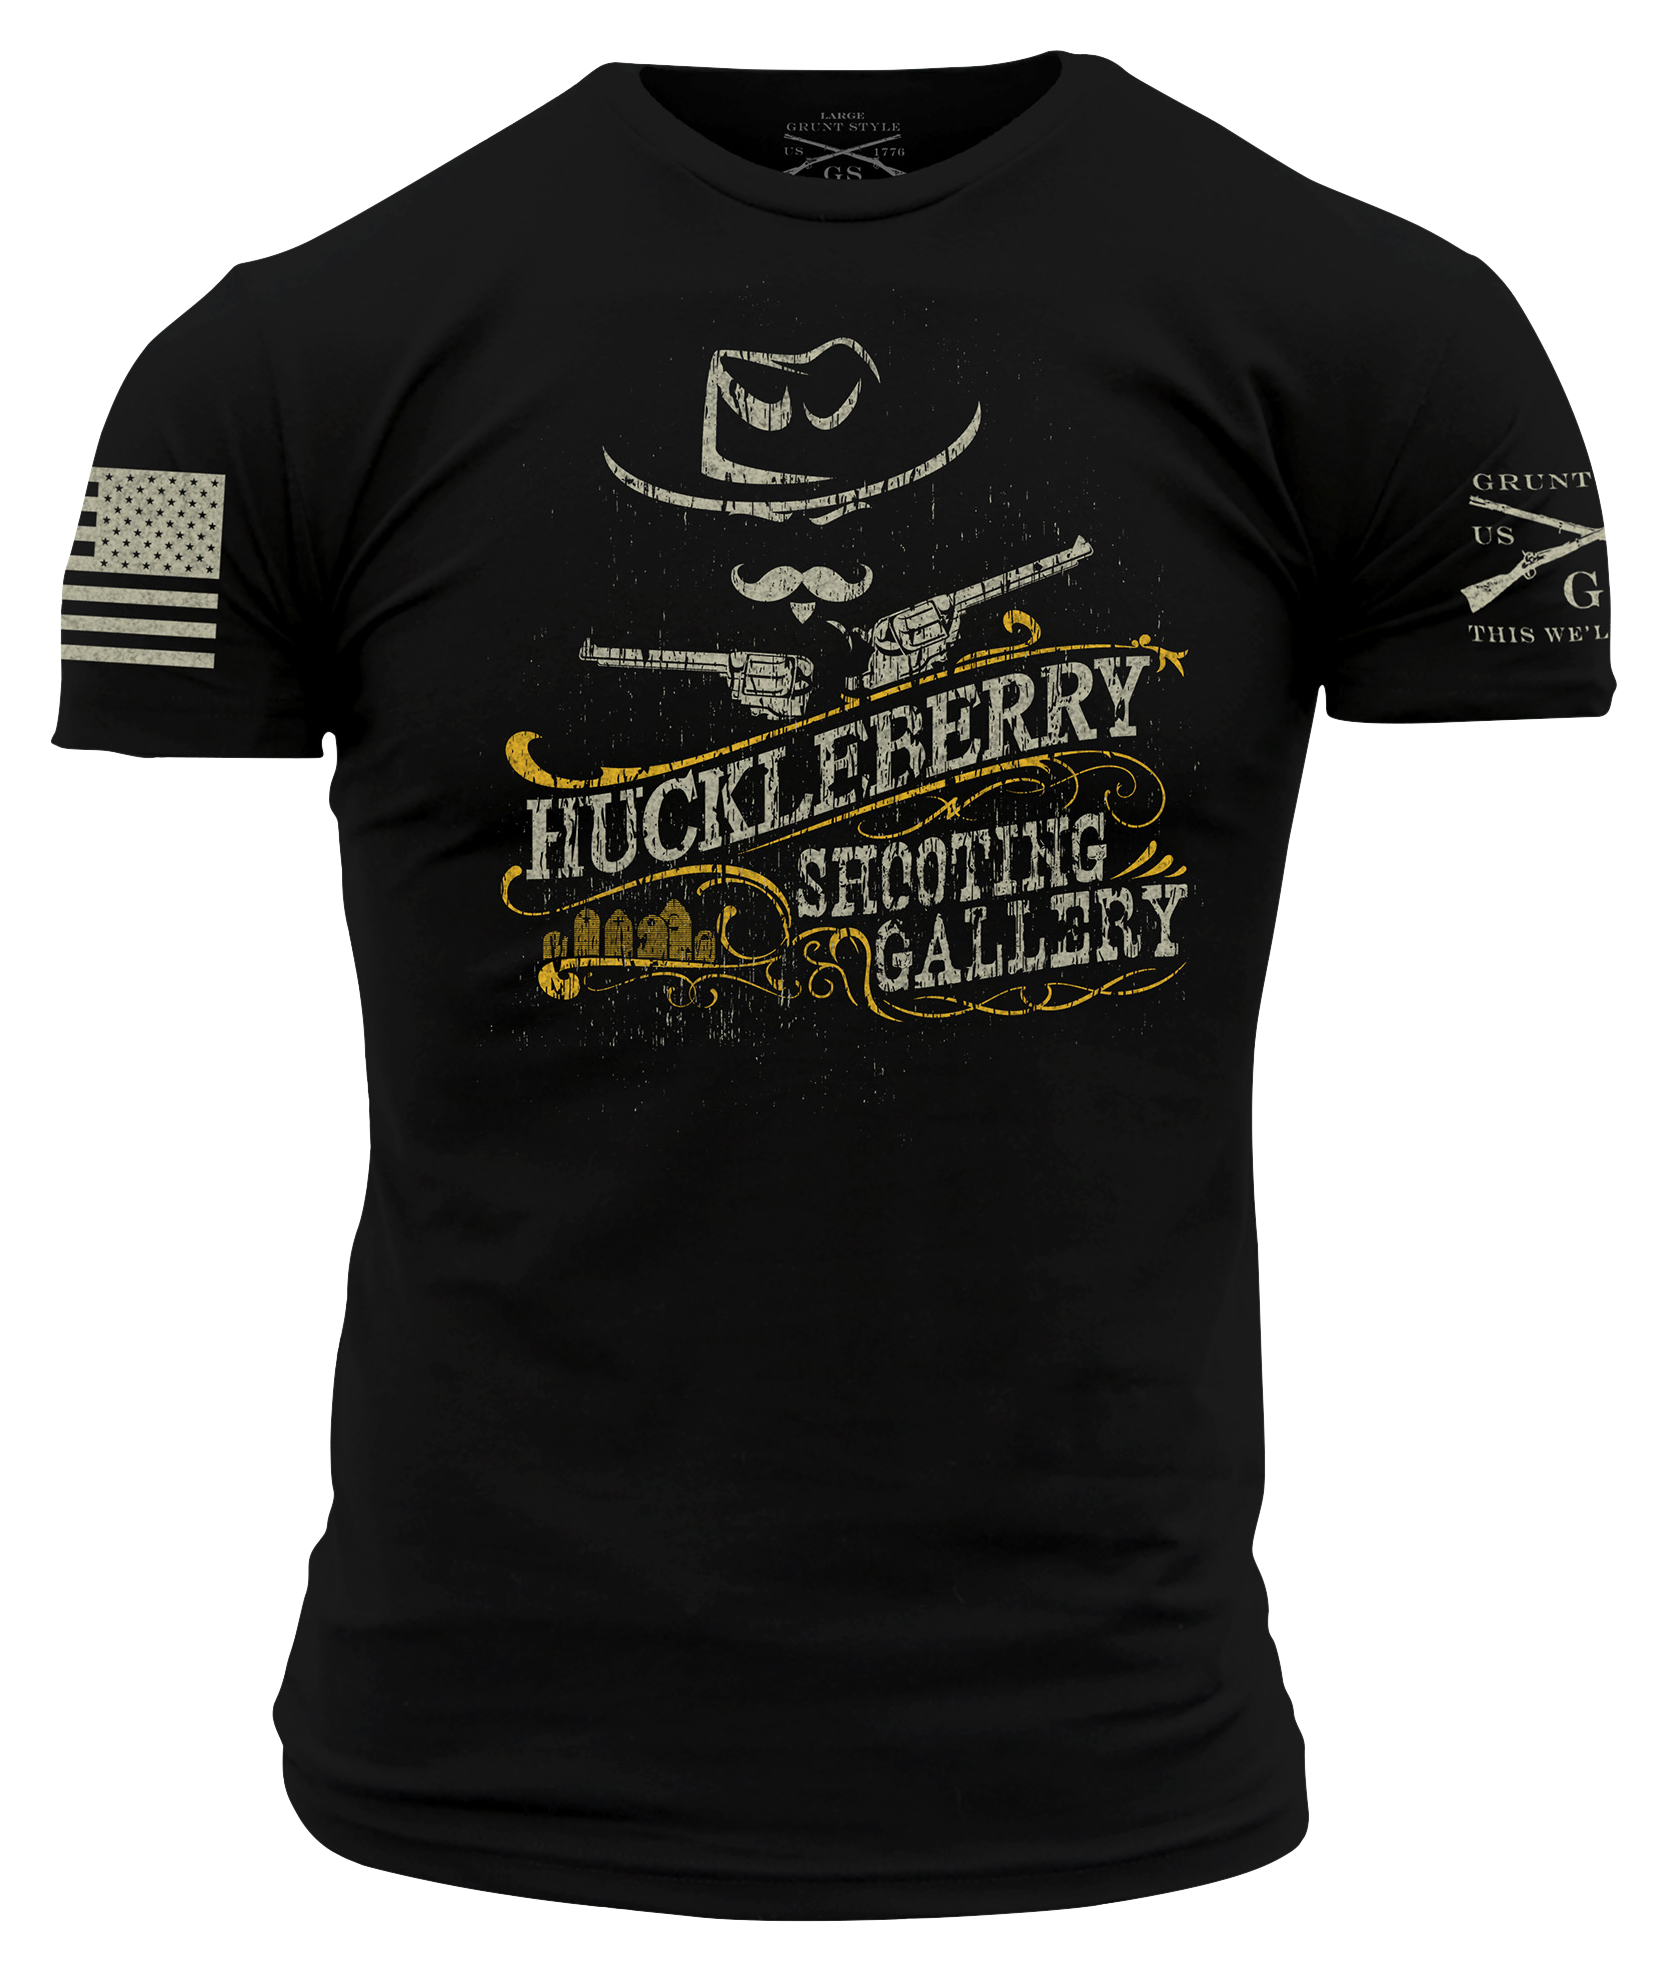 Grunt Style Huckleberry Shooting Gallery Short-Sleeve T-Shirt for